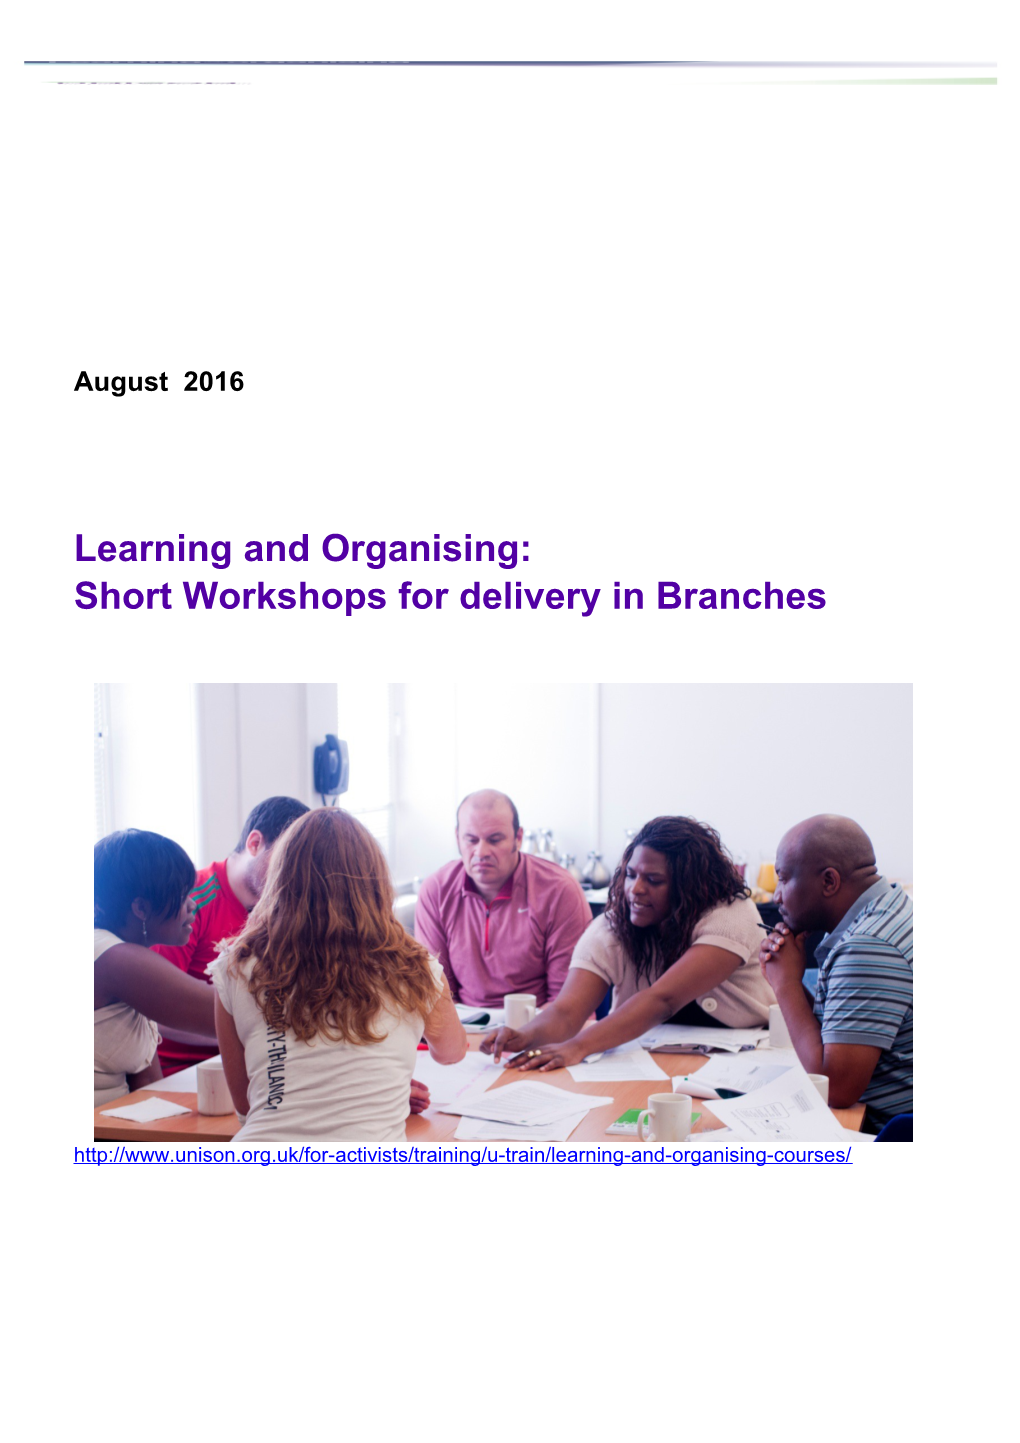 Learning and Organising: Short Workshops for Delivery in Branches